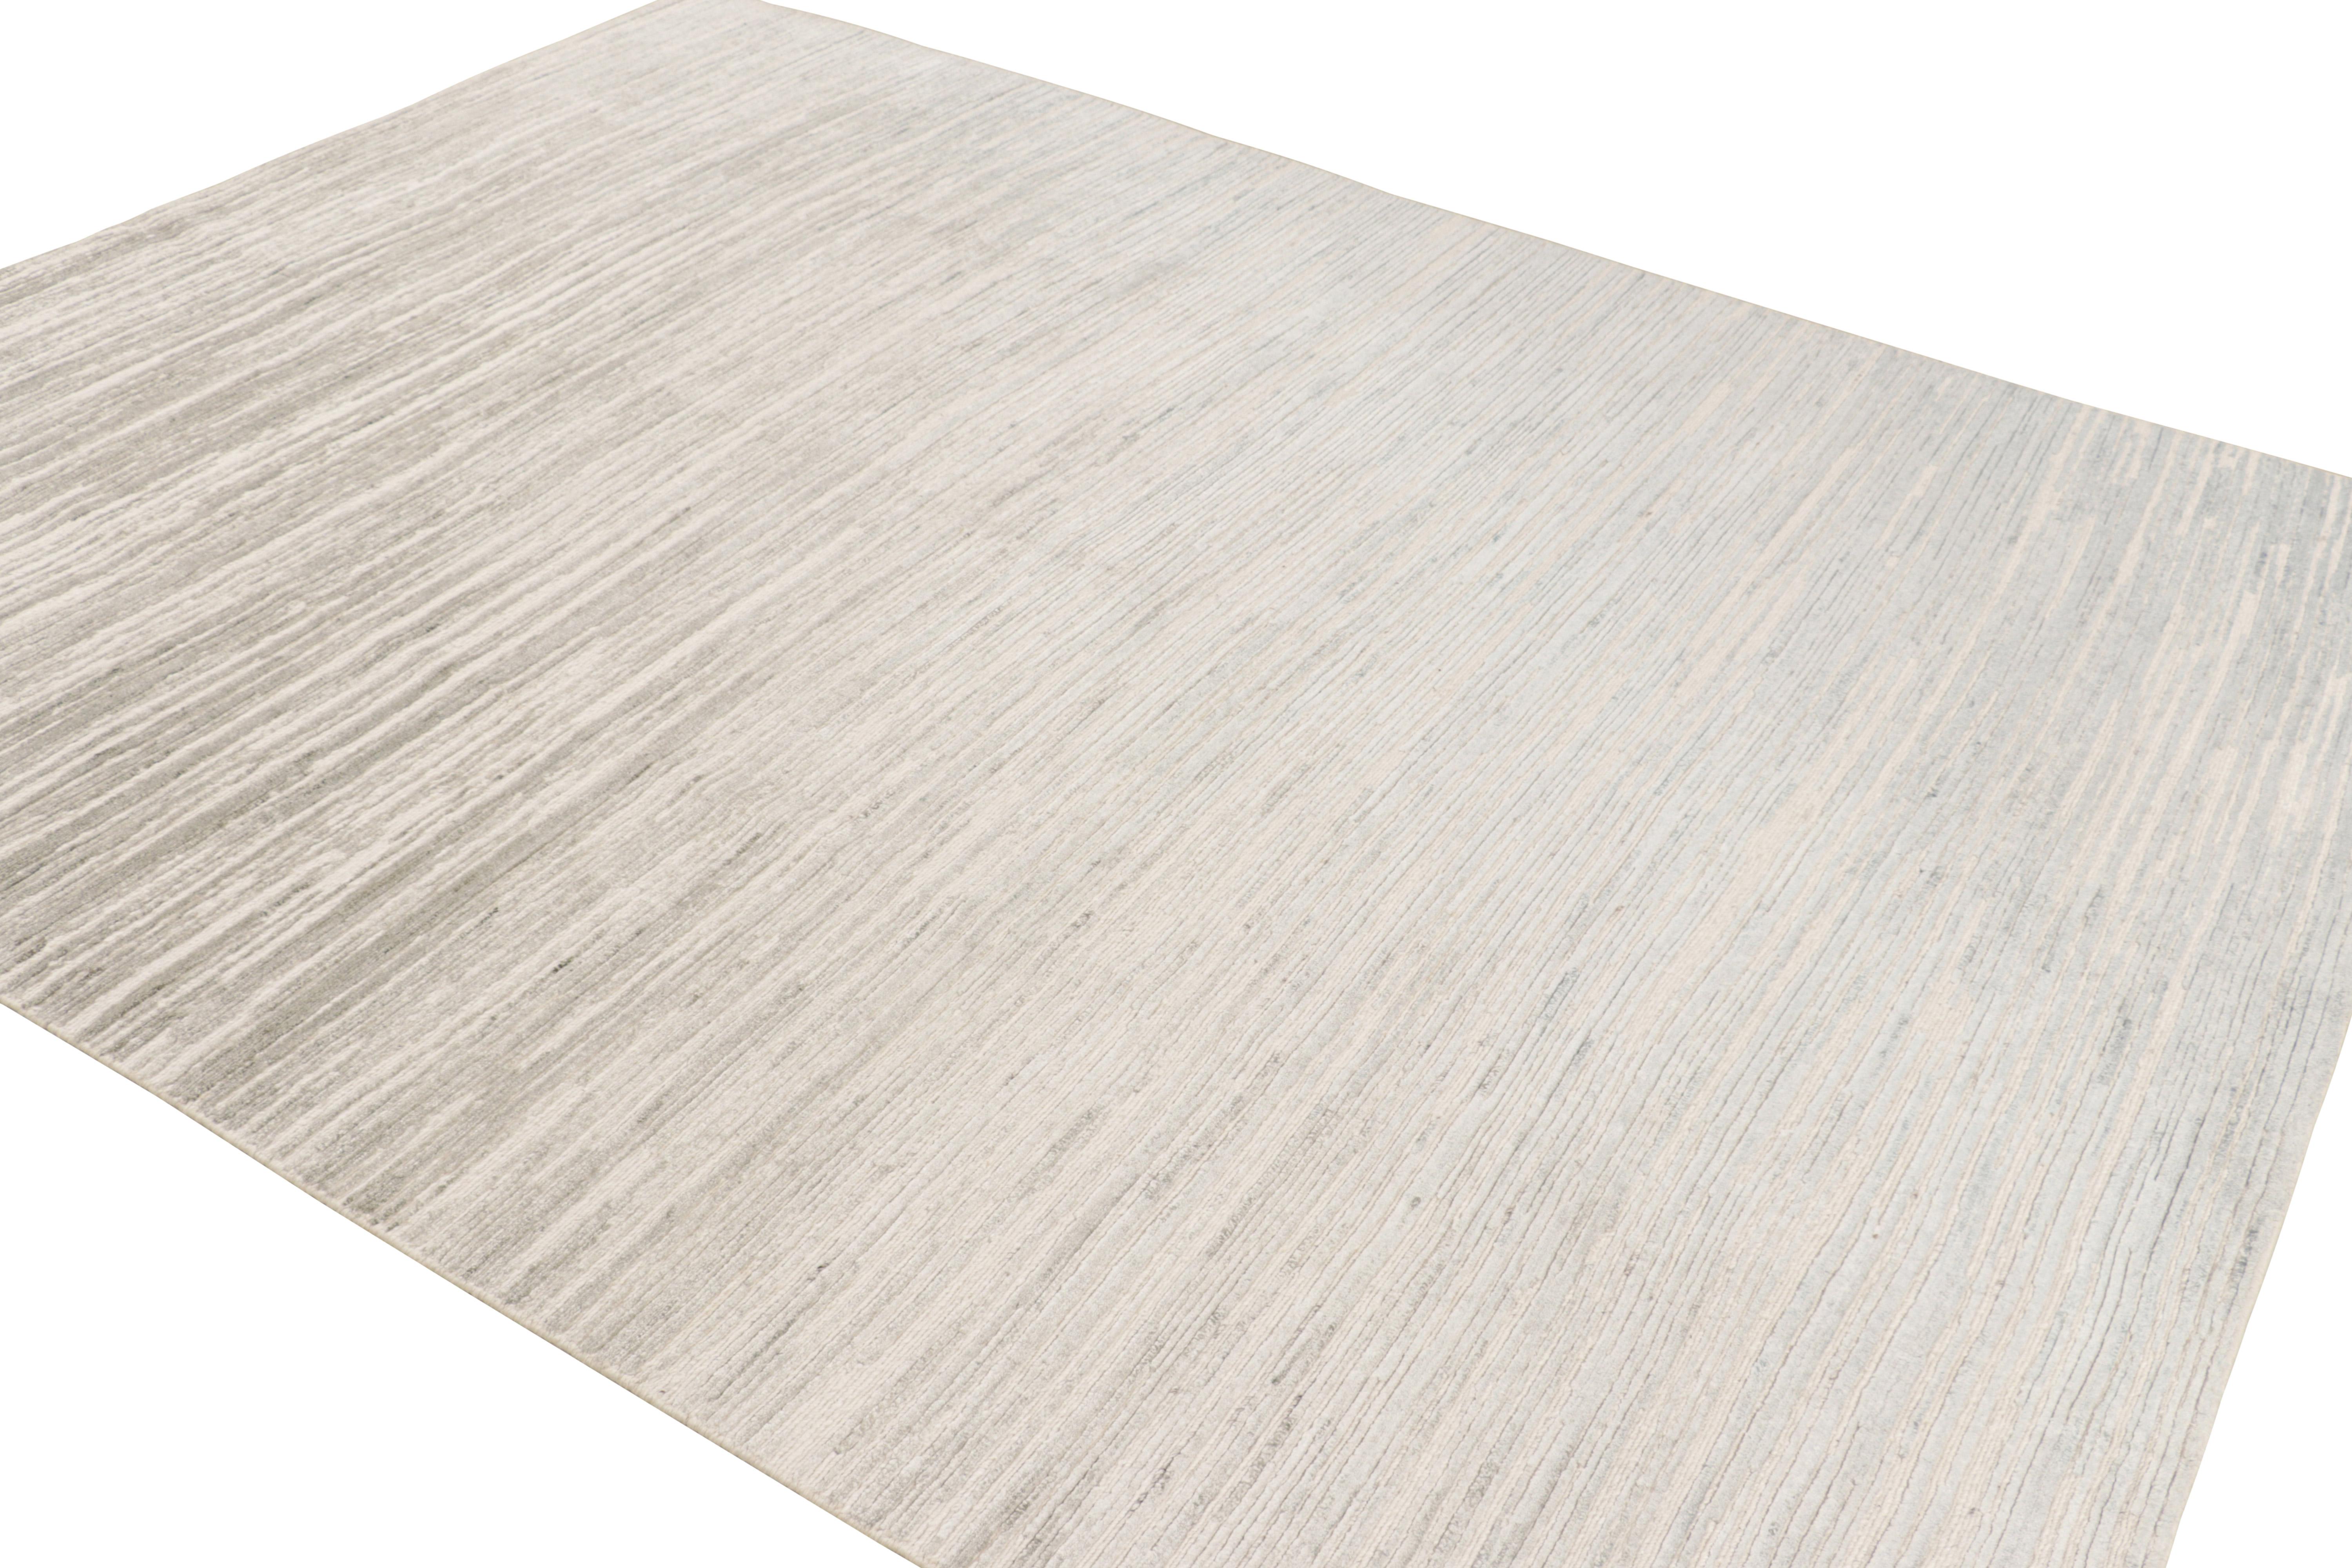 Indian Rug & Kilim’s Textural Rug in White and Cream-Gray Abstract High-Low Stripes For Sale